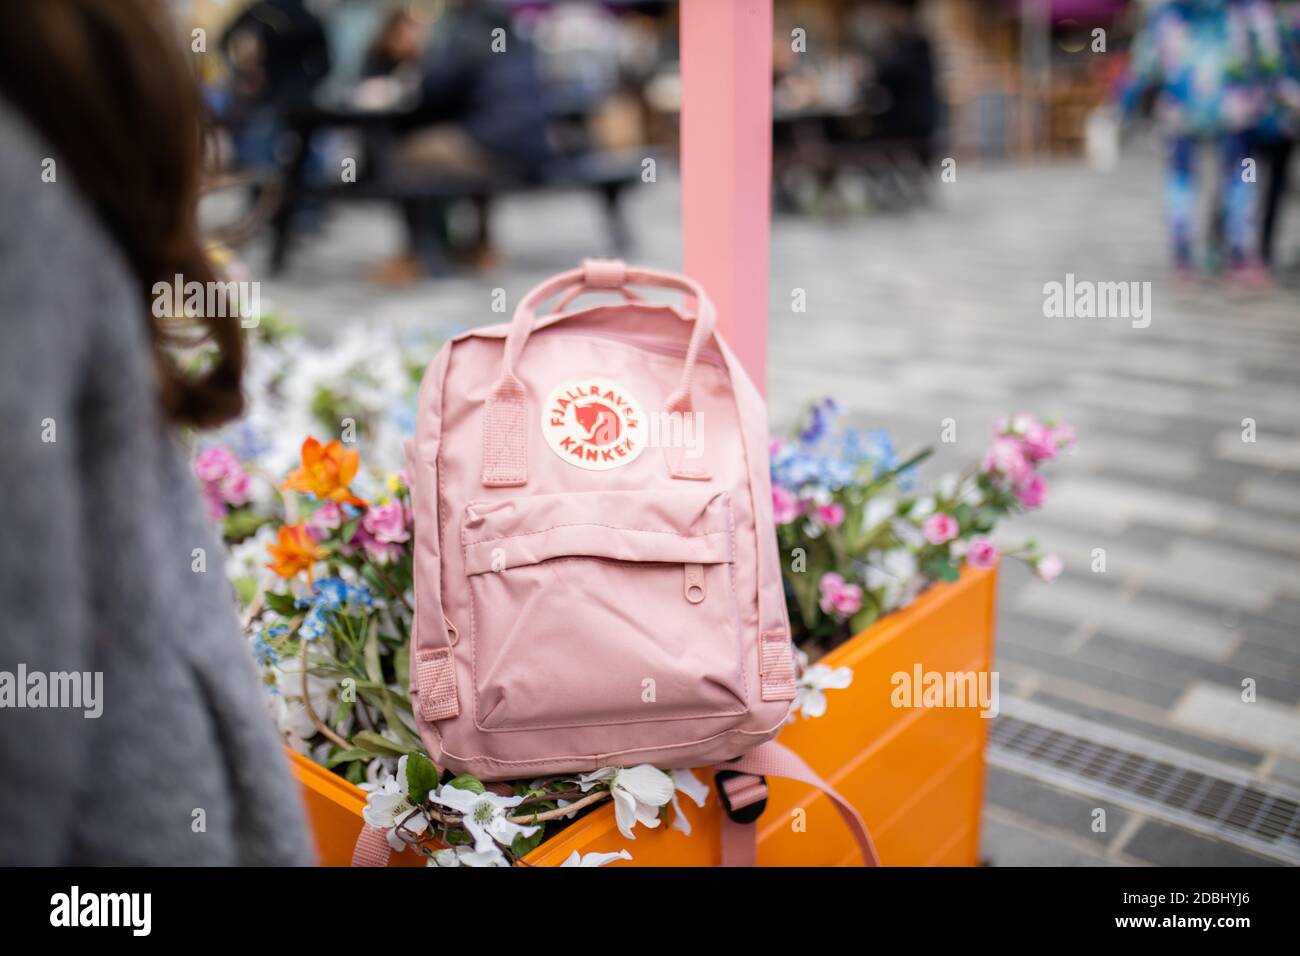 Pink backpack on top of flowers and plants with a street as background Stock Photo